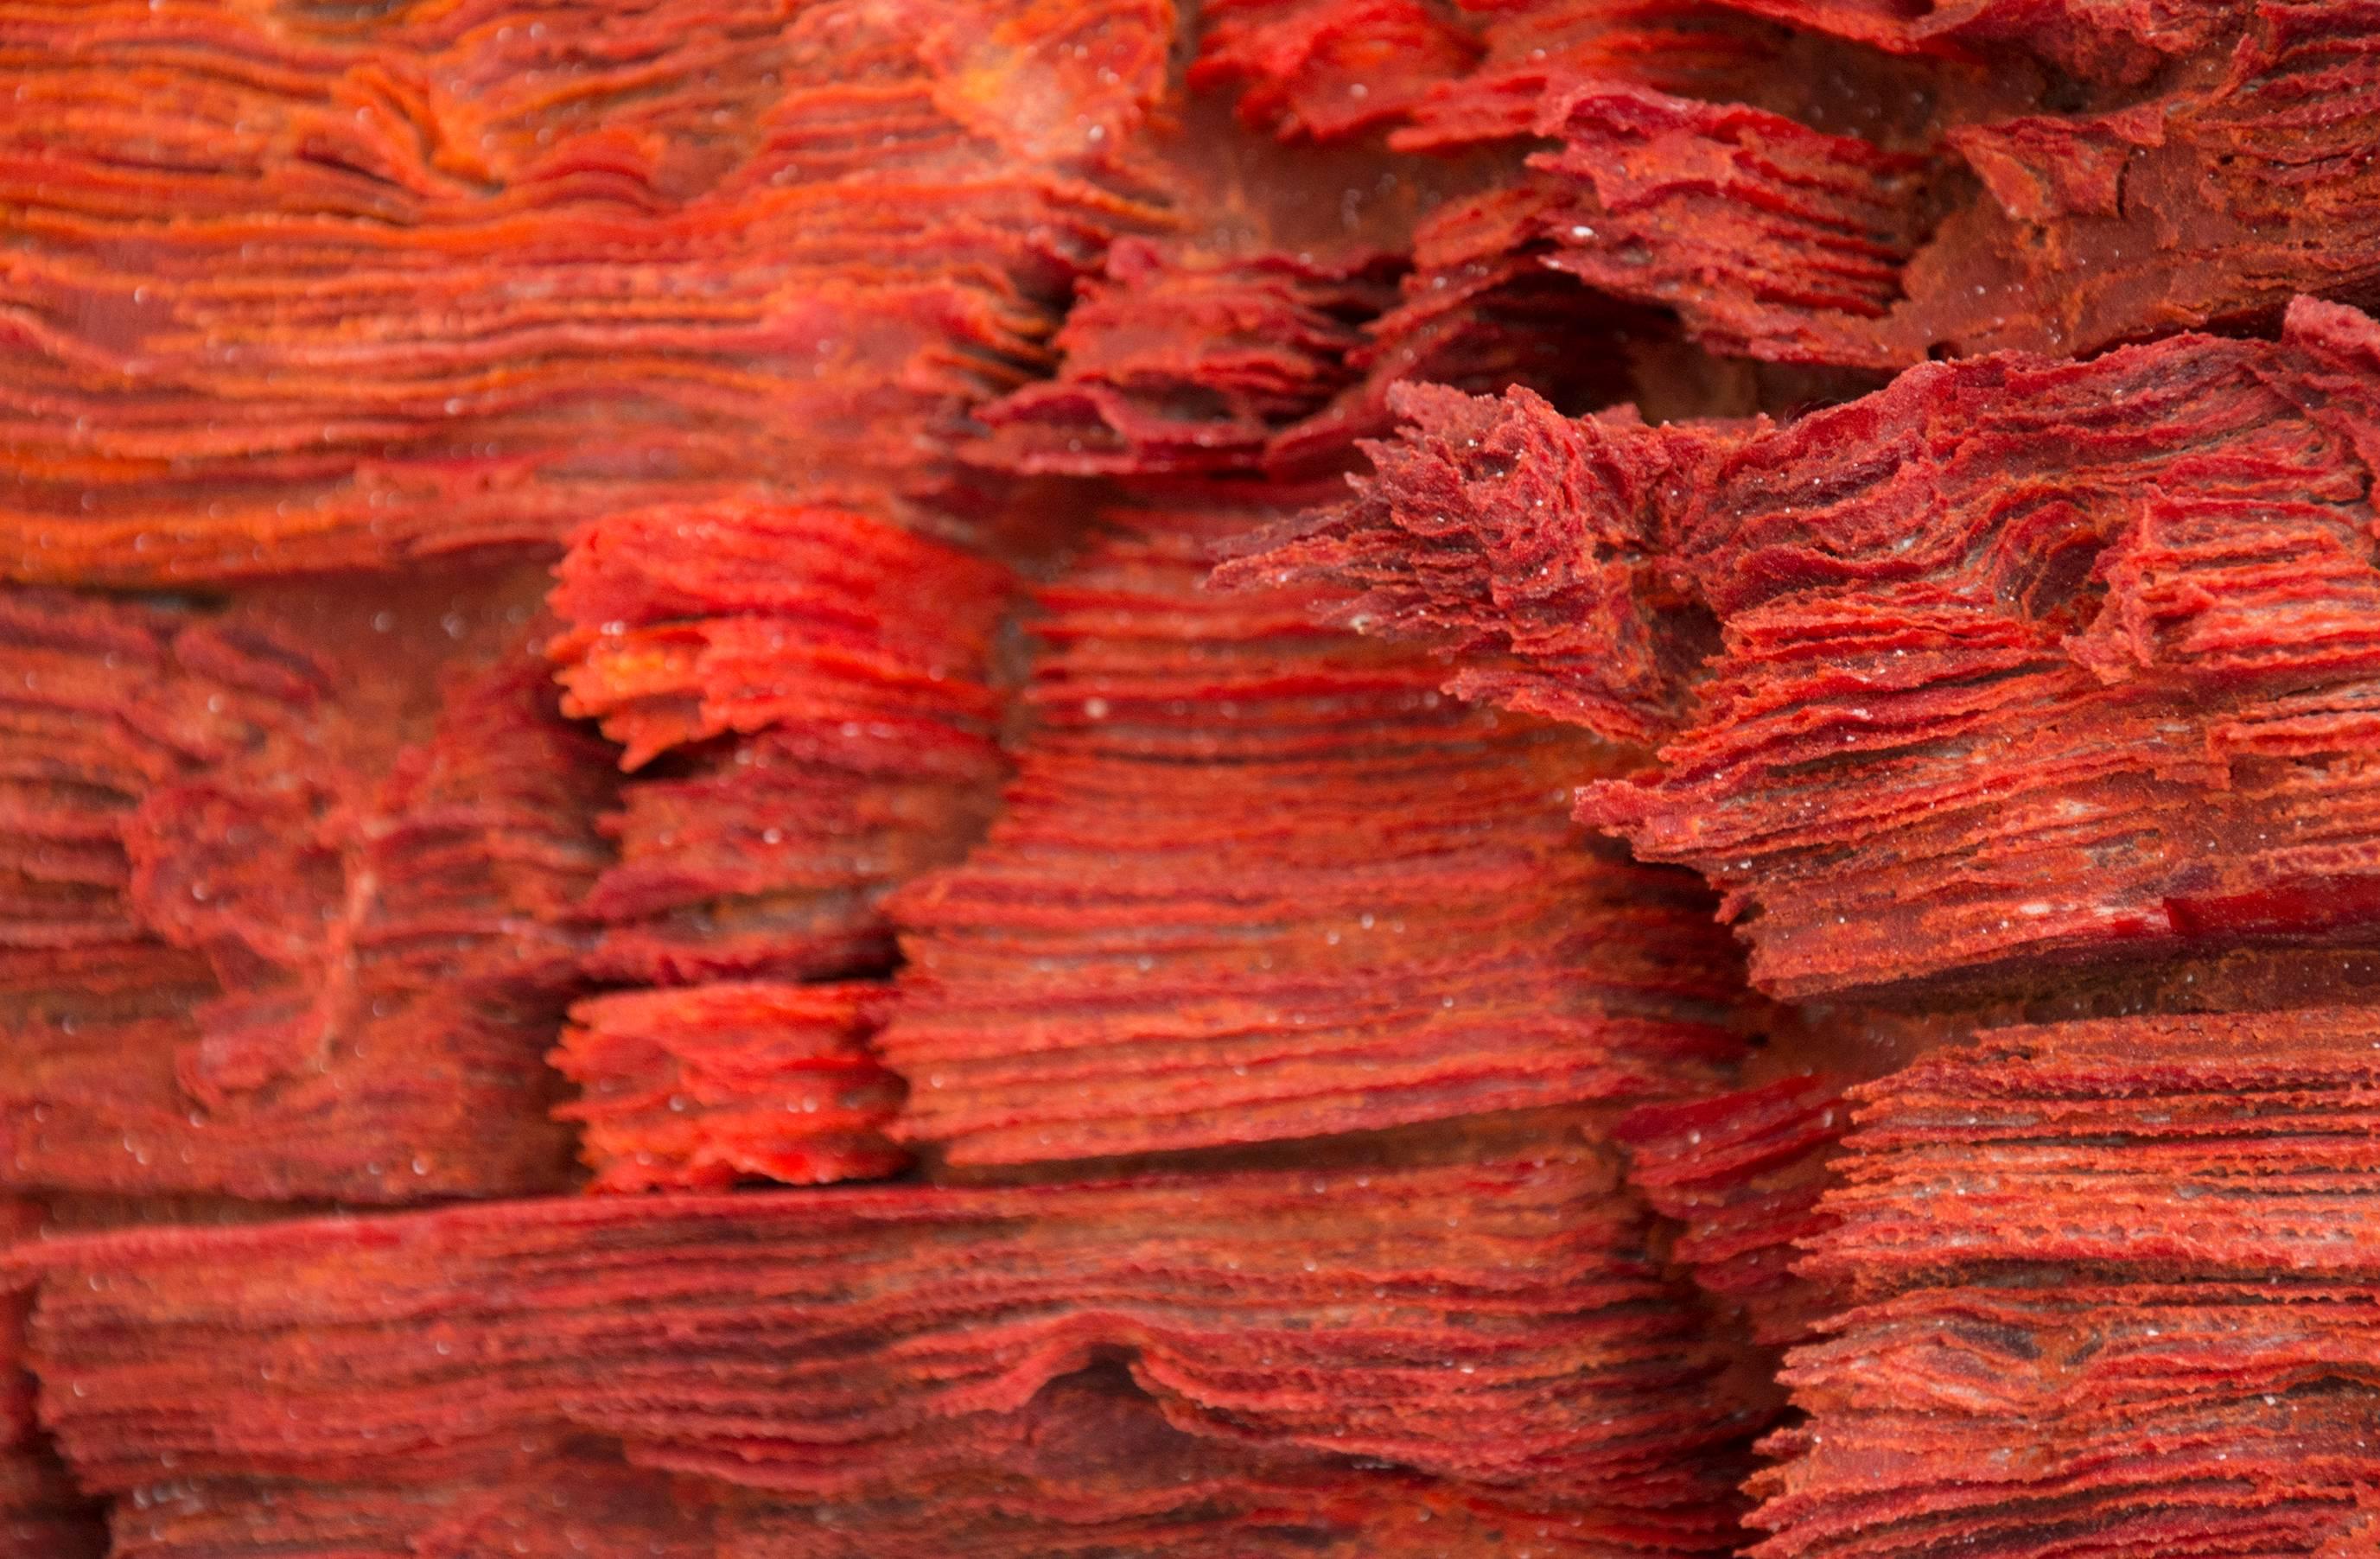 Layers of lush red and orange glass are fused together in this vibrant and flowing sculptural wall piece. The glass frit is fused in delicate layers and shapes that evoke the weathering of rock in nature from wind and water.  

The coral-like